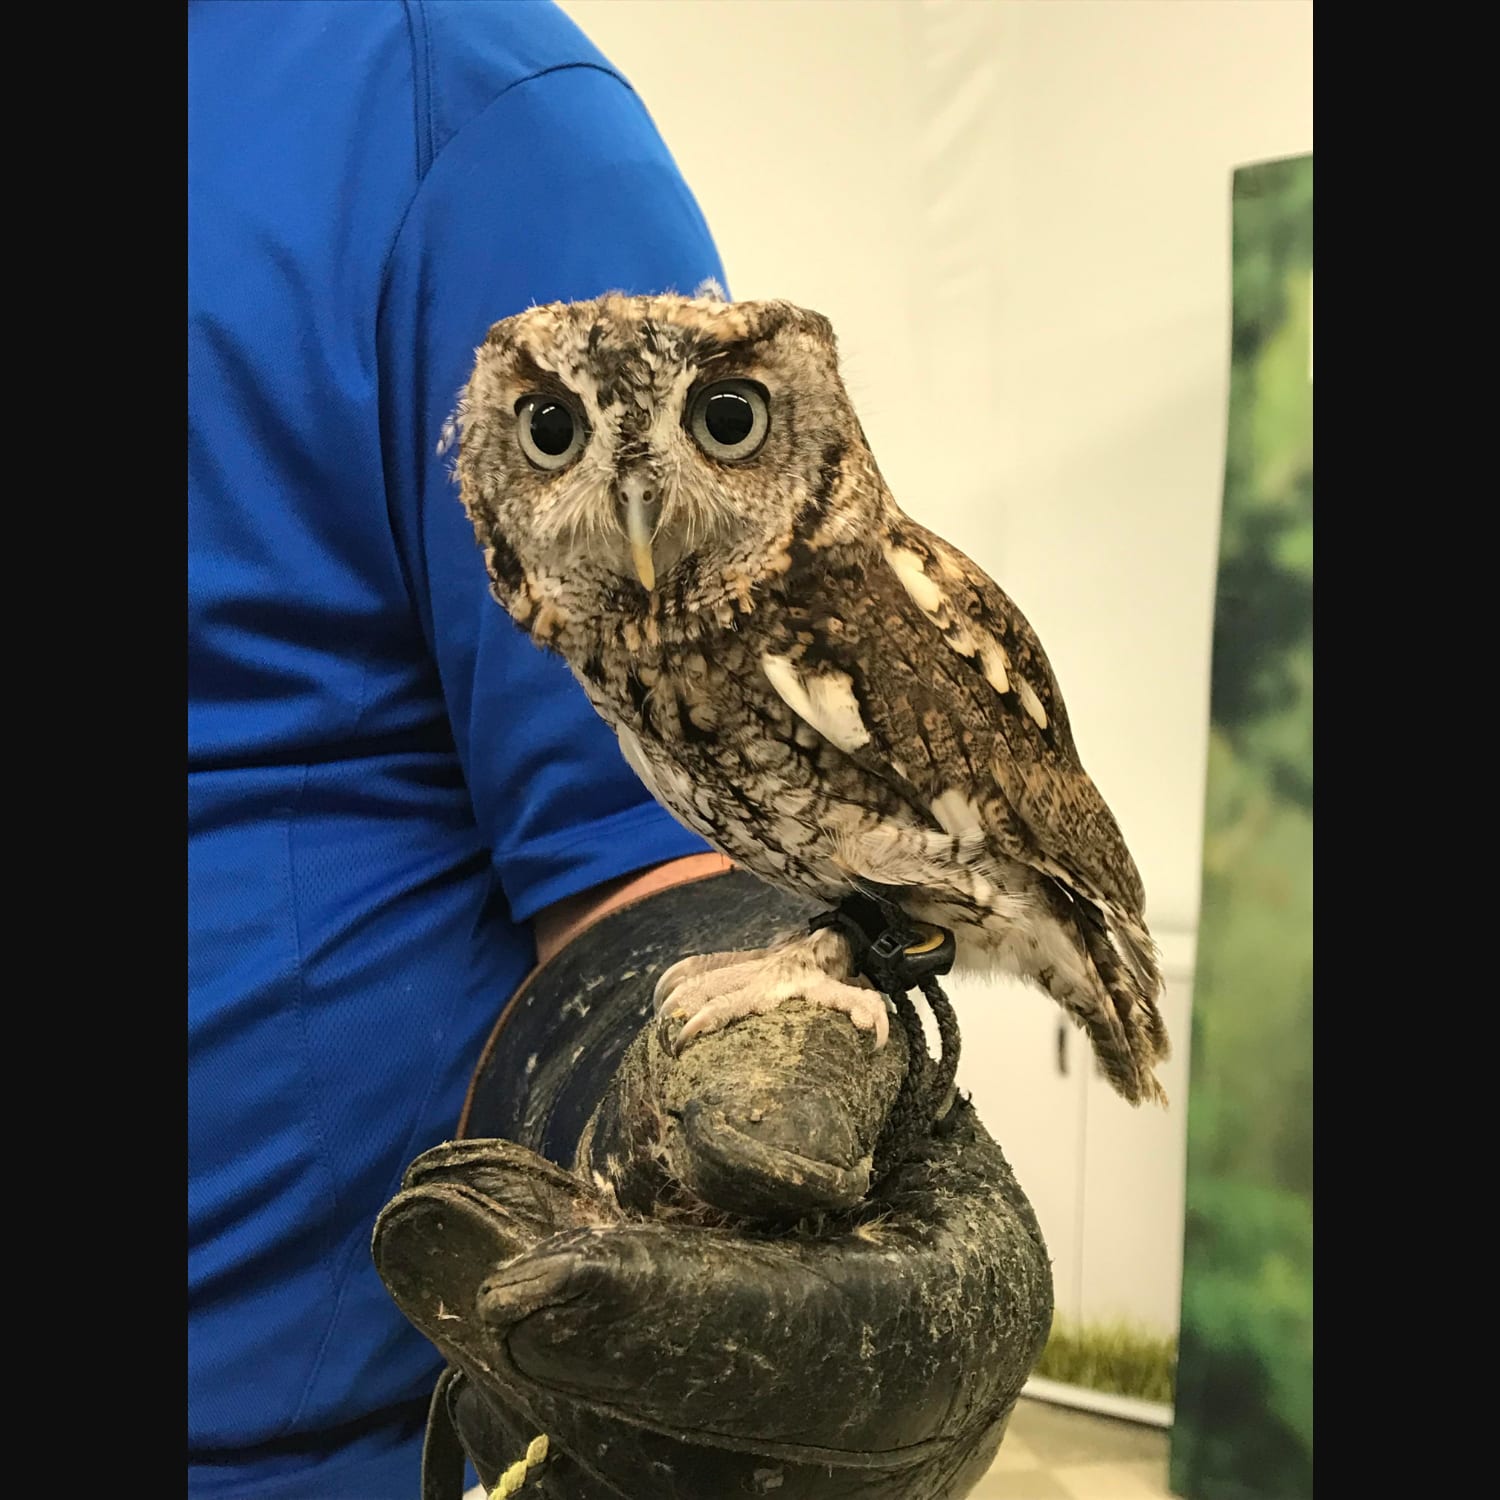 Meet Luna, from Pittsburgh’s National Aviary.